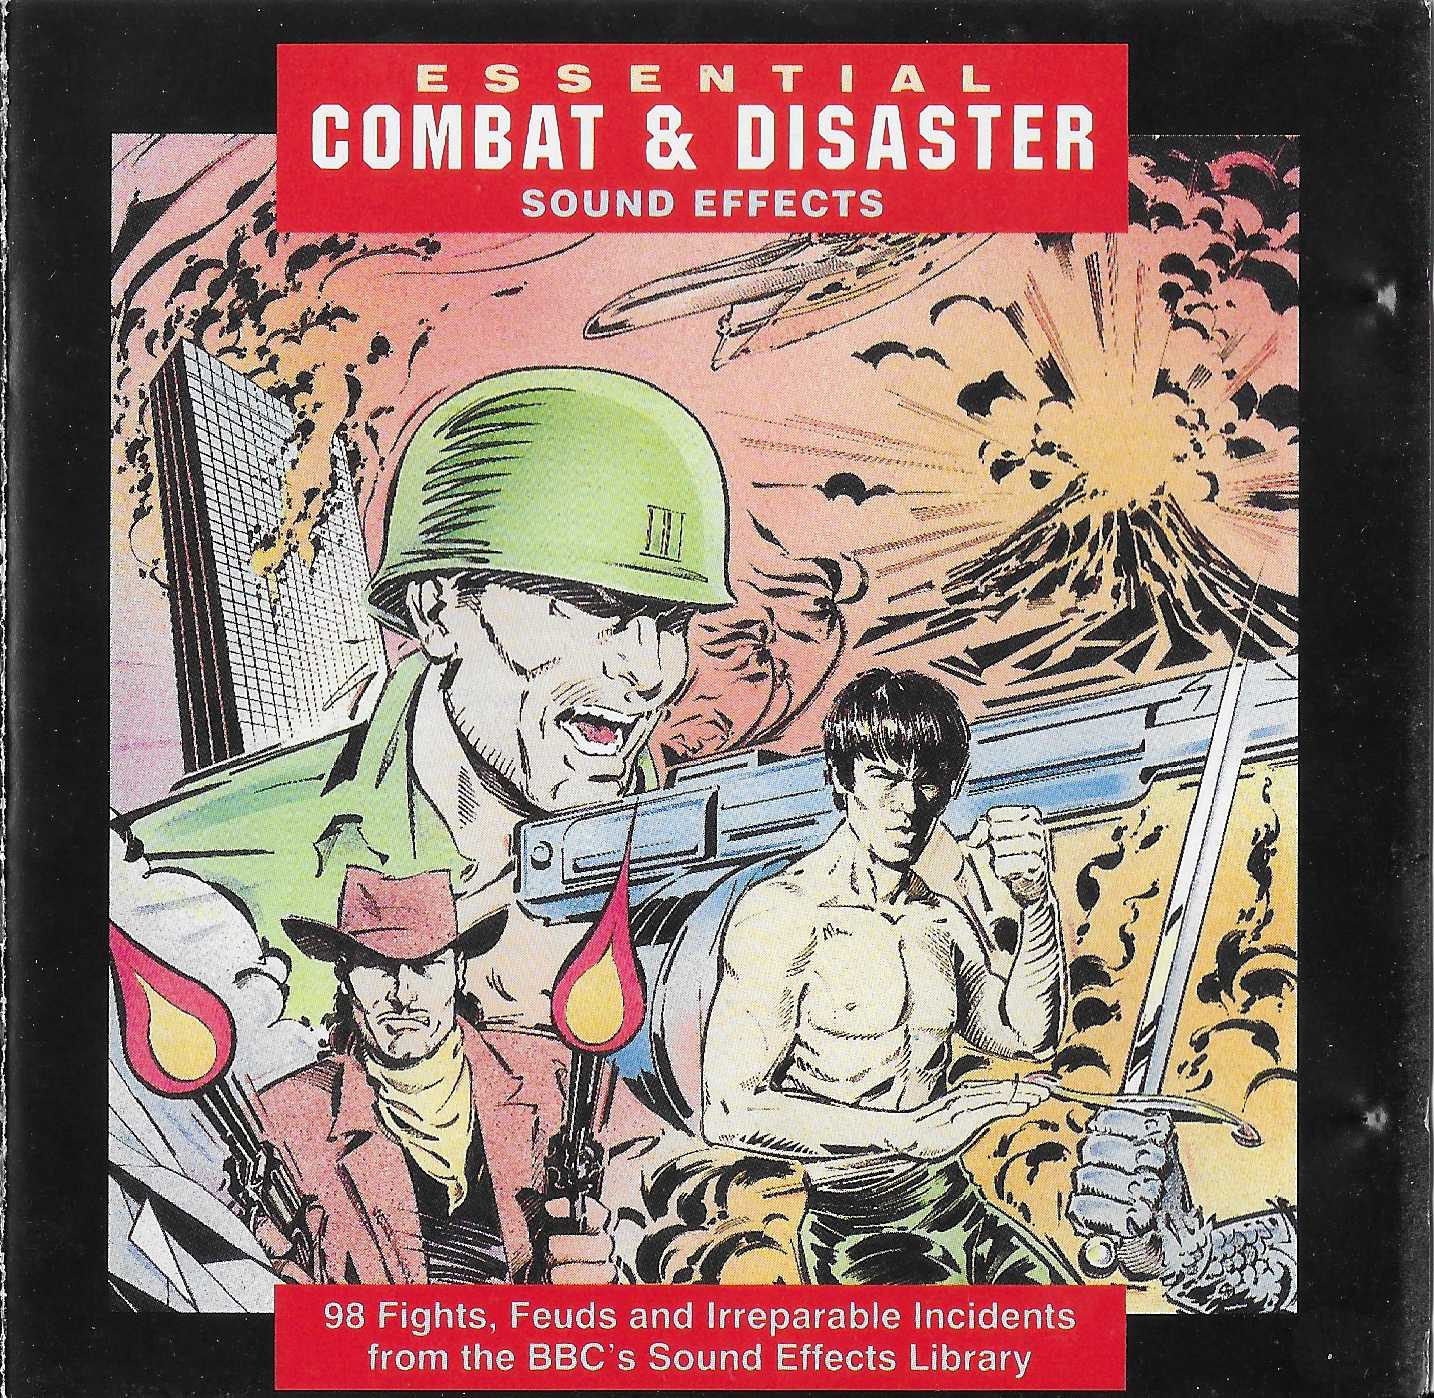 Picture of Essential combat & disasters sound effects by artist Various from the BBC cds - Records and Tapes library